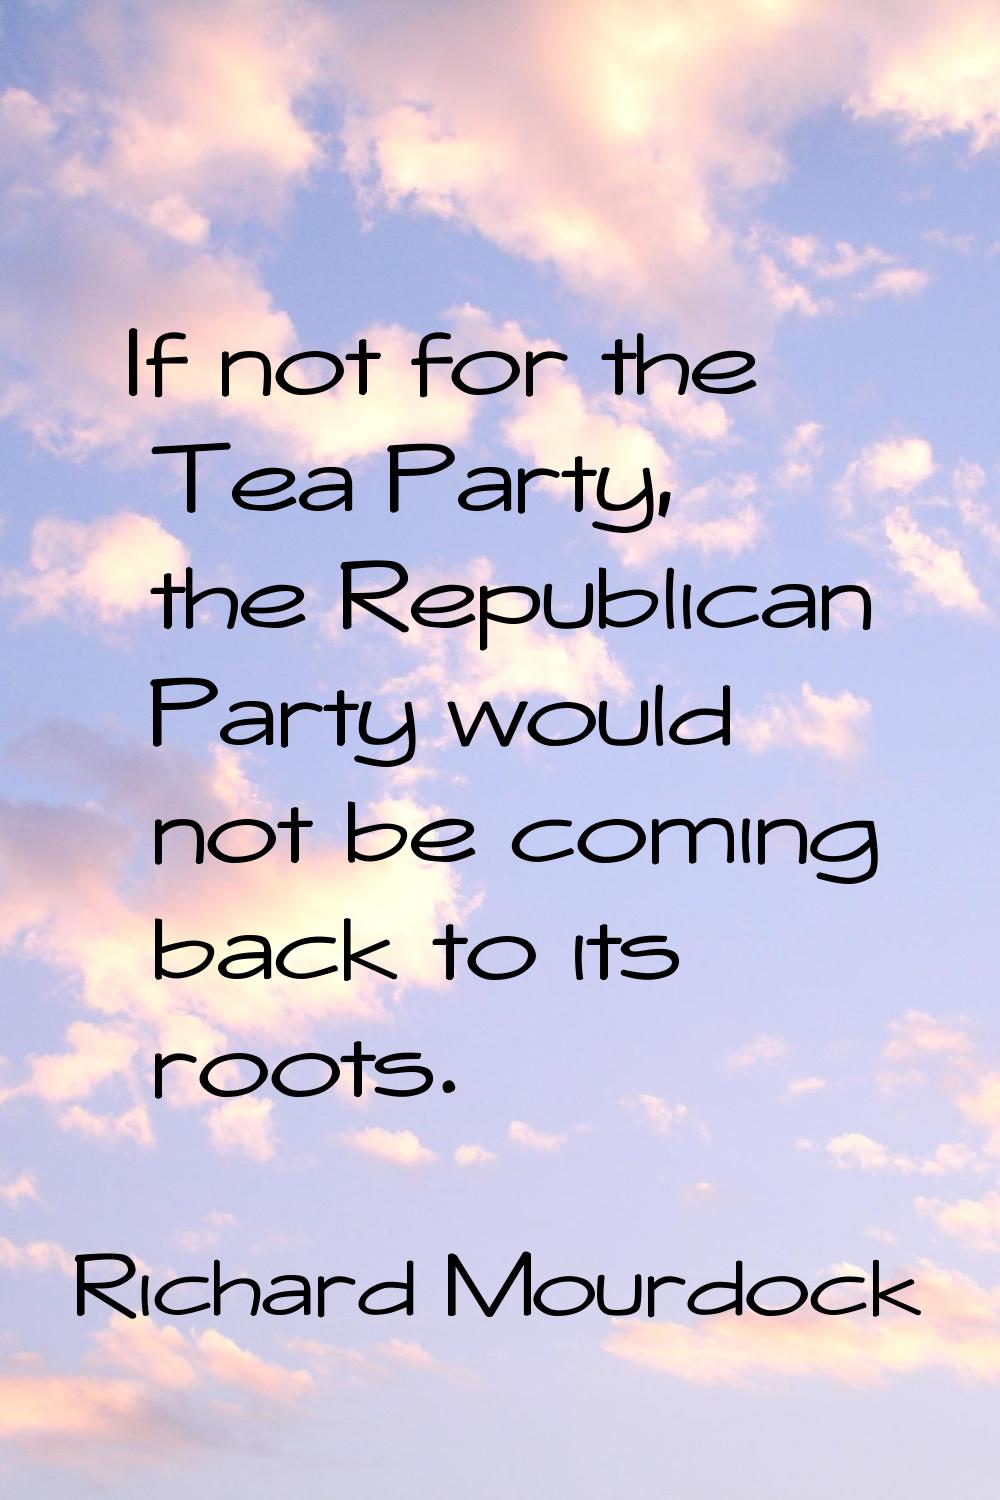 If not for the Tea Party, the Republican Party would not be coming back to its roots.